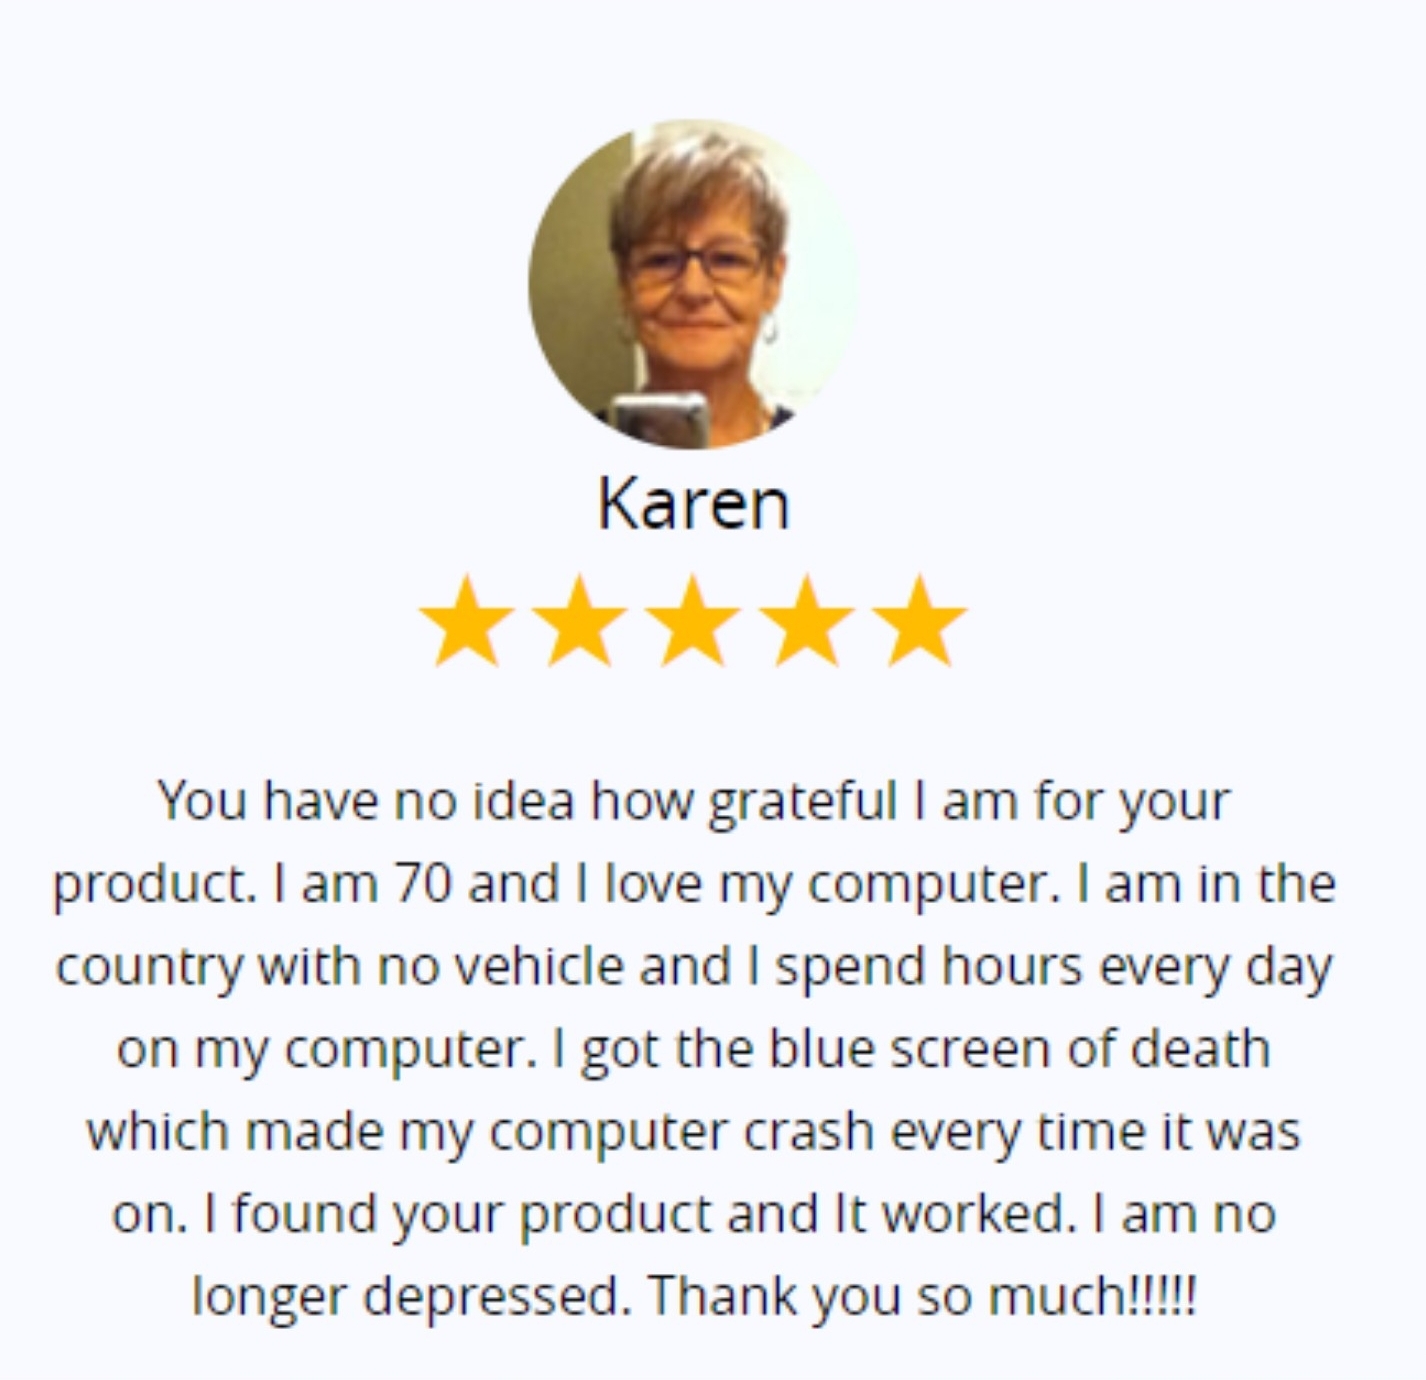 The rare, five star Karen would like to thank your manager.